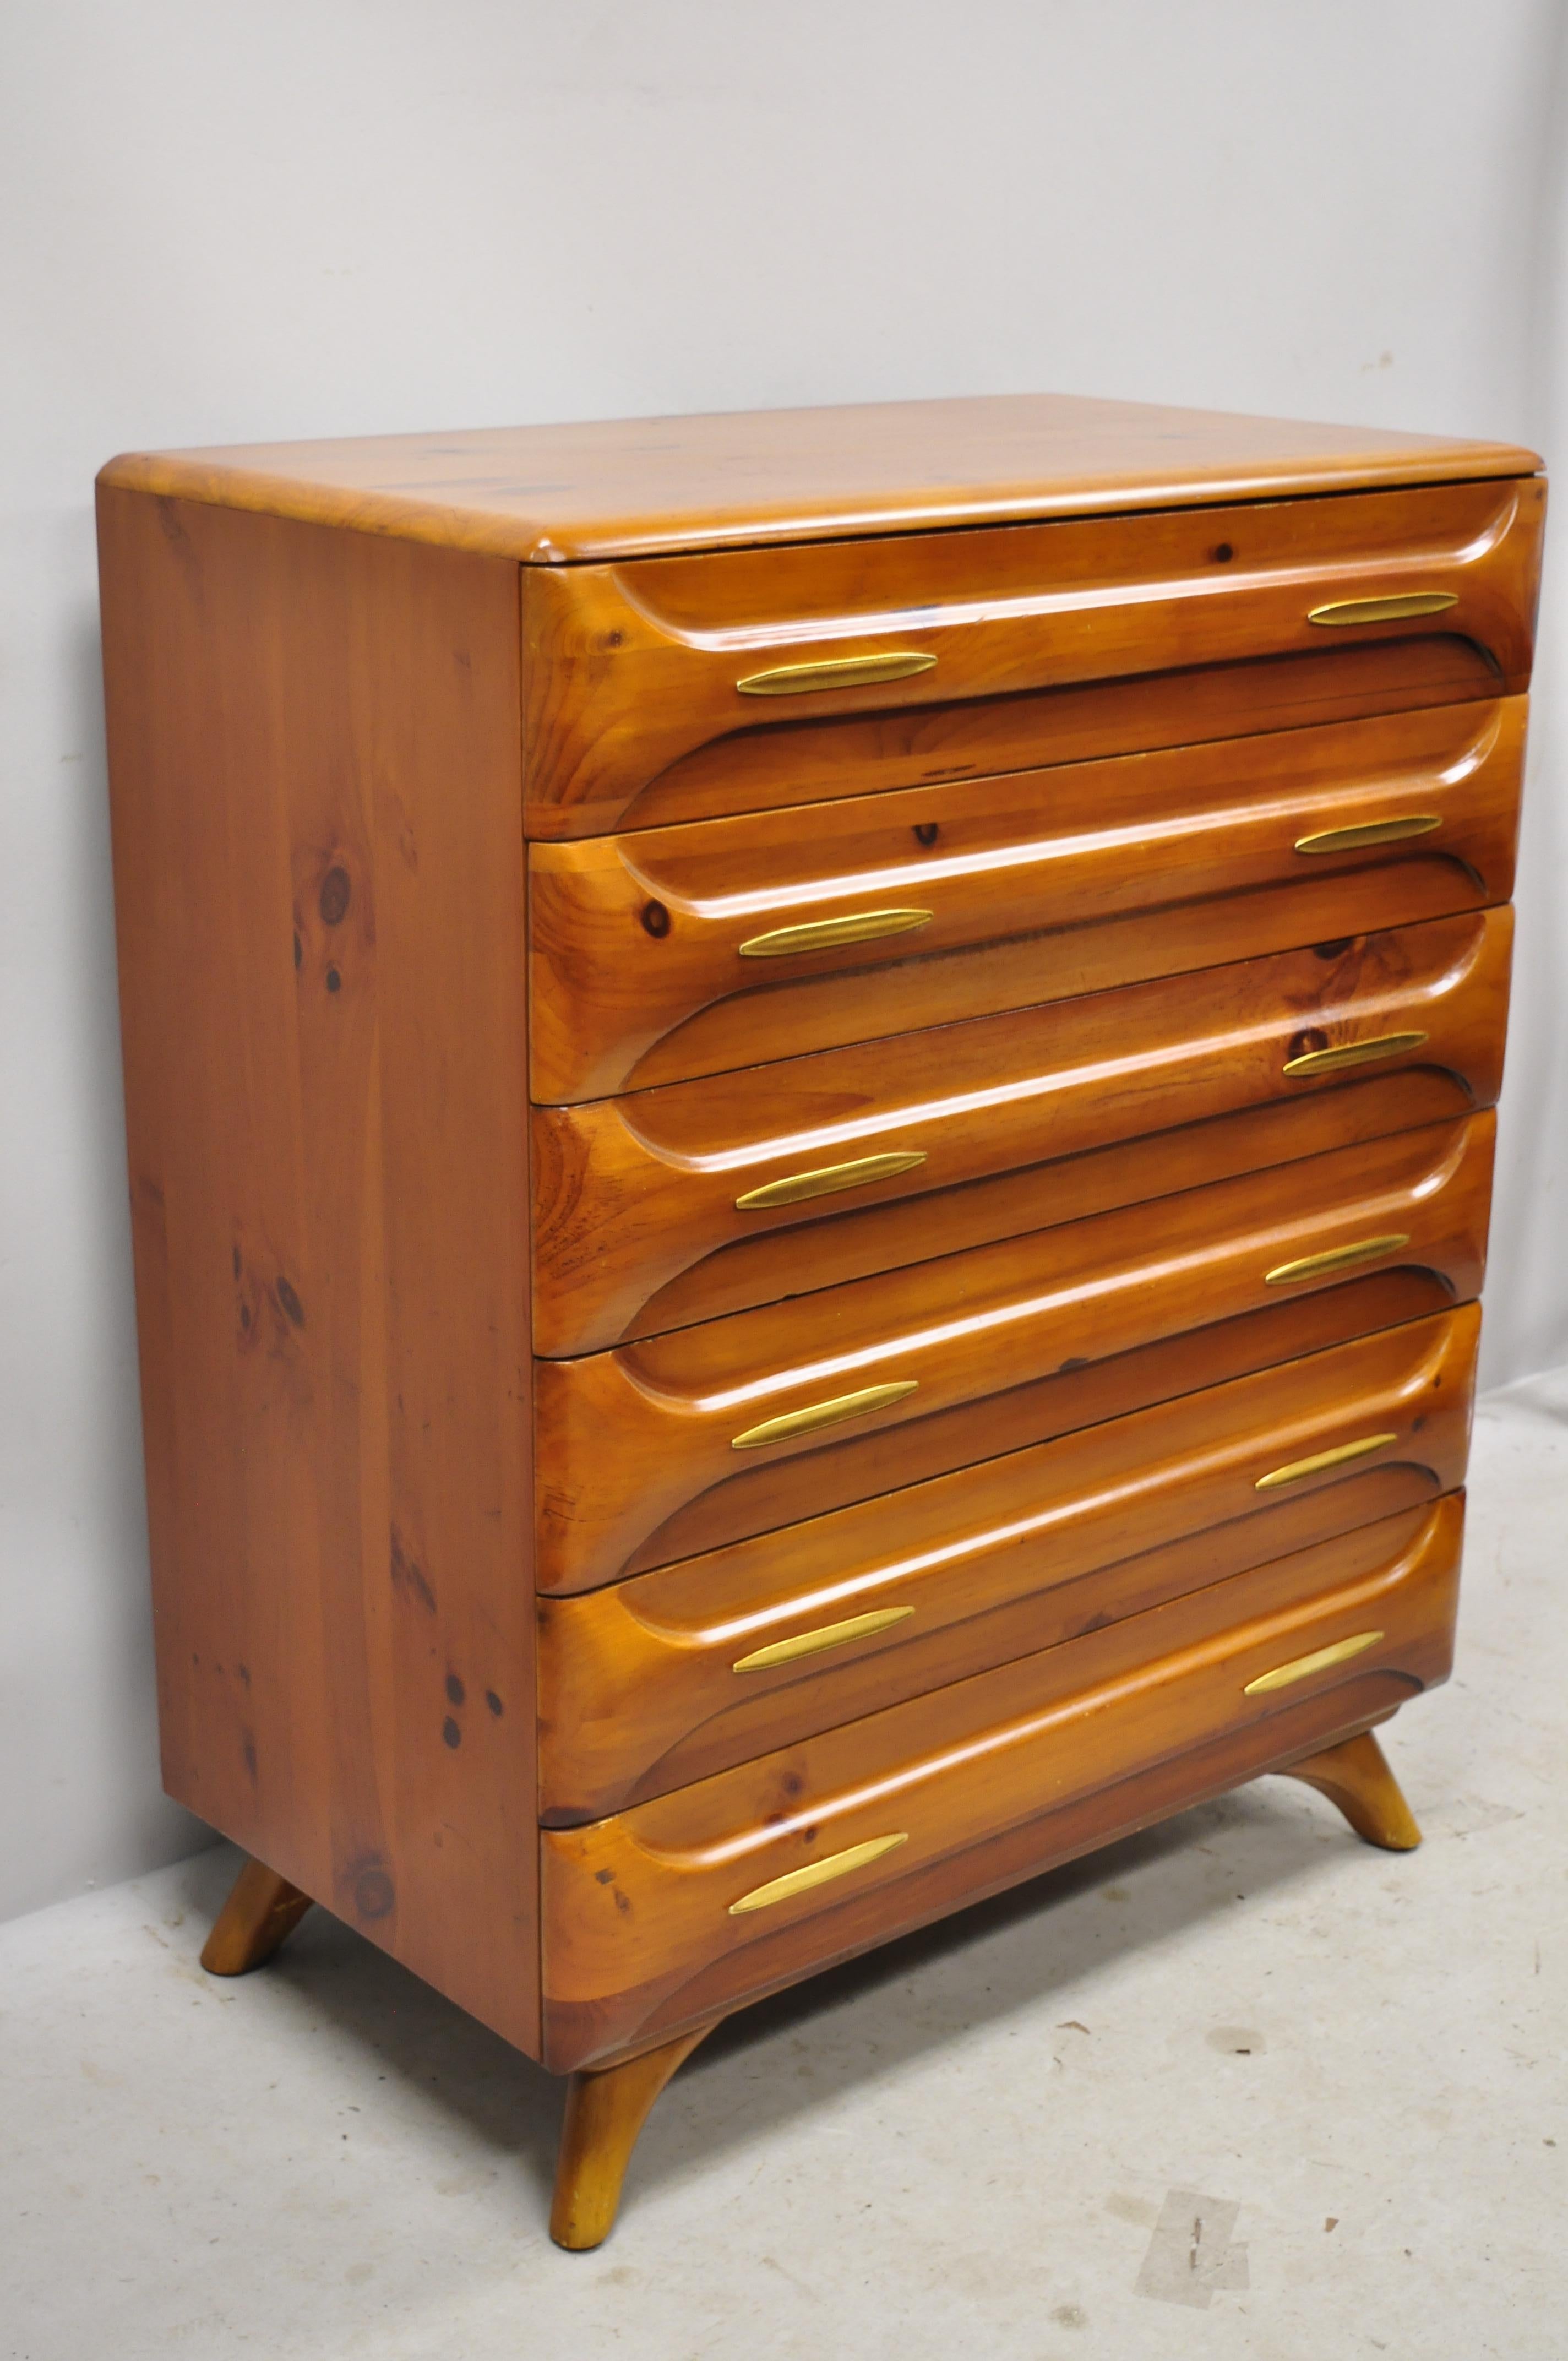 Mid-Century Modern Franklin Shockey sculptured pine wood 6-drawer chest dresser. Item features solid wood construction, beautiful wood grain, distressed finish, original label, 6 drawers, tapered legs, solid brass hardware, very nice vintage item,